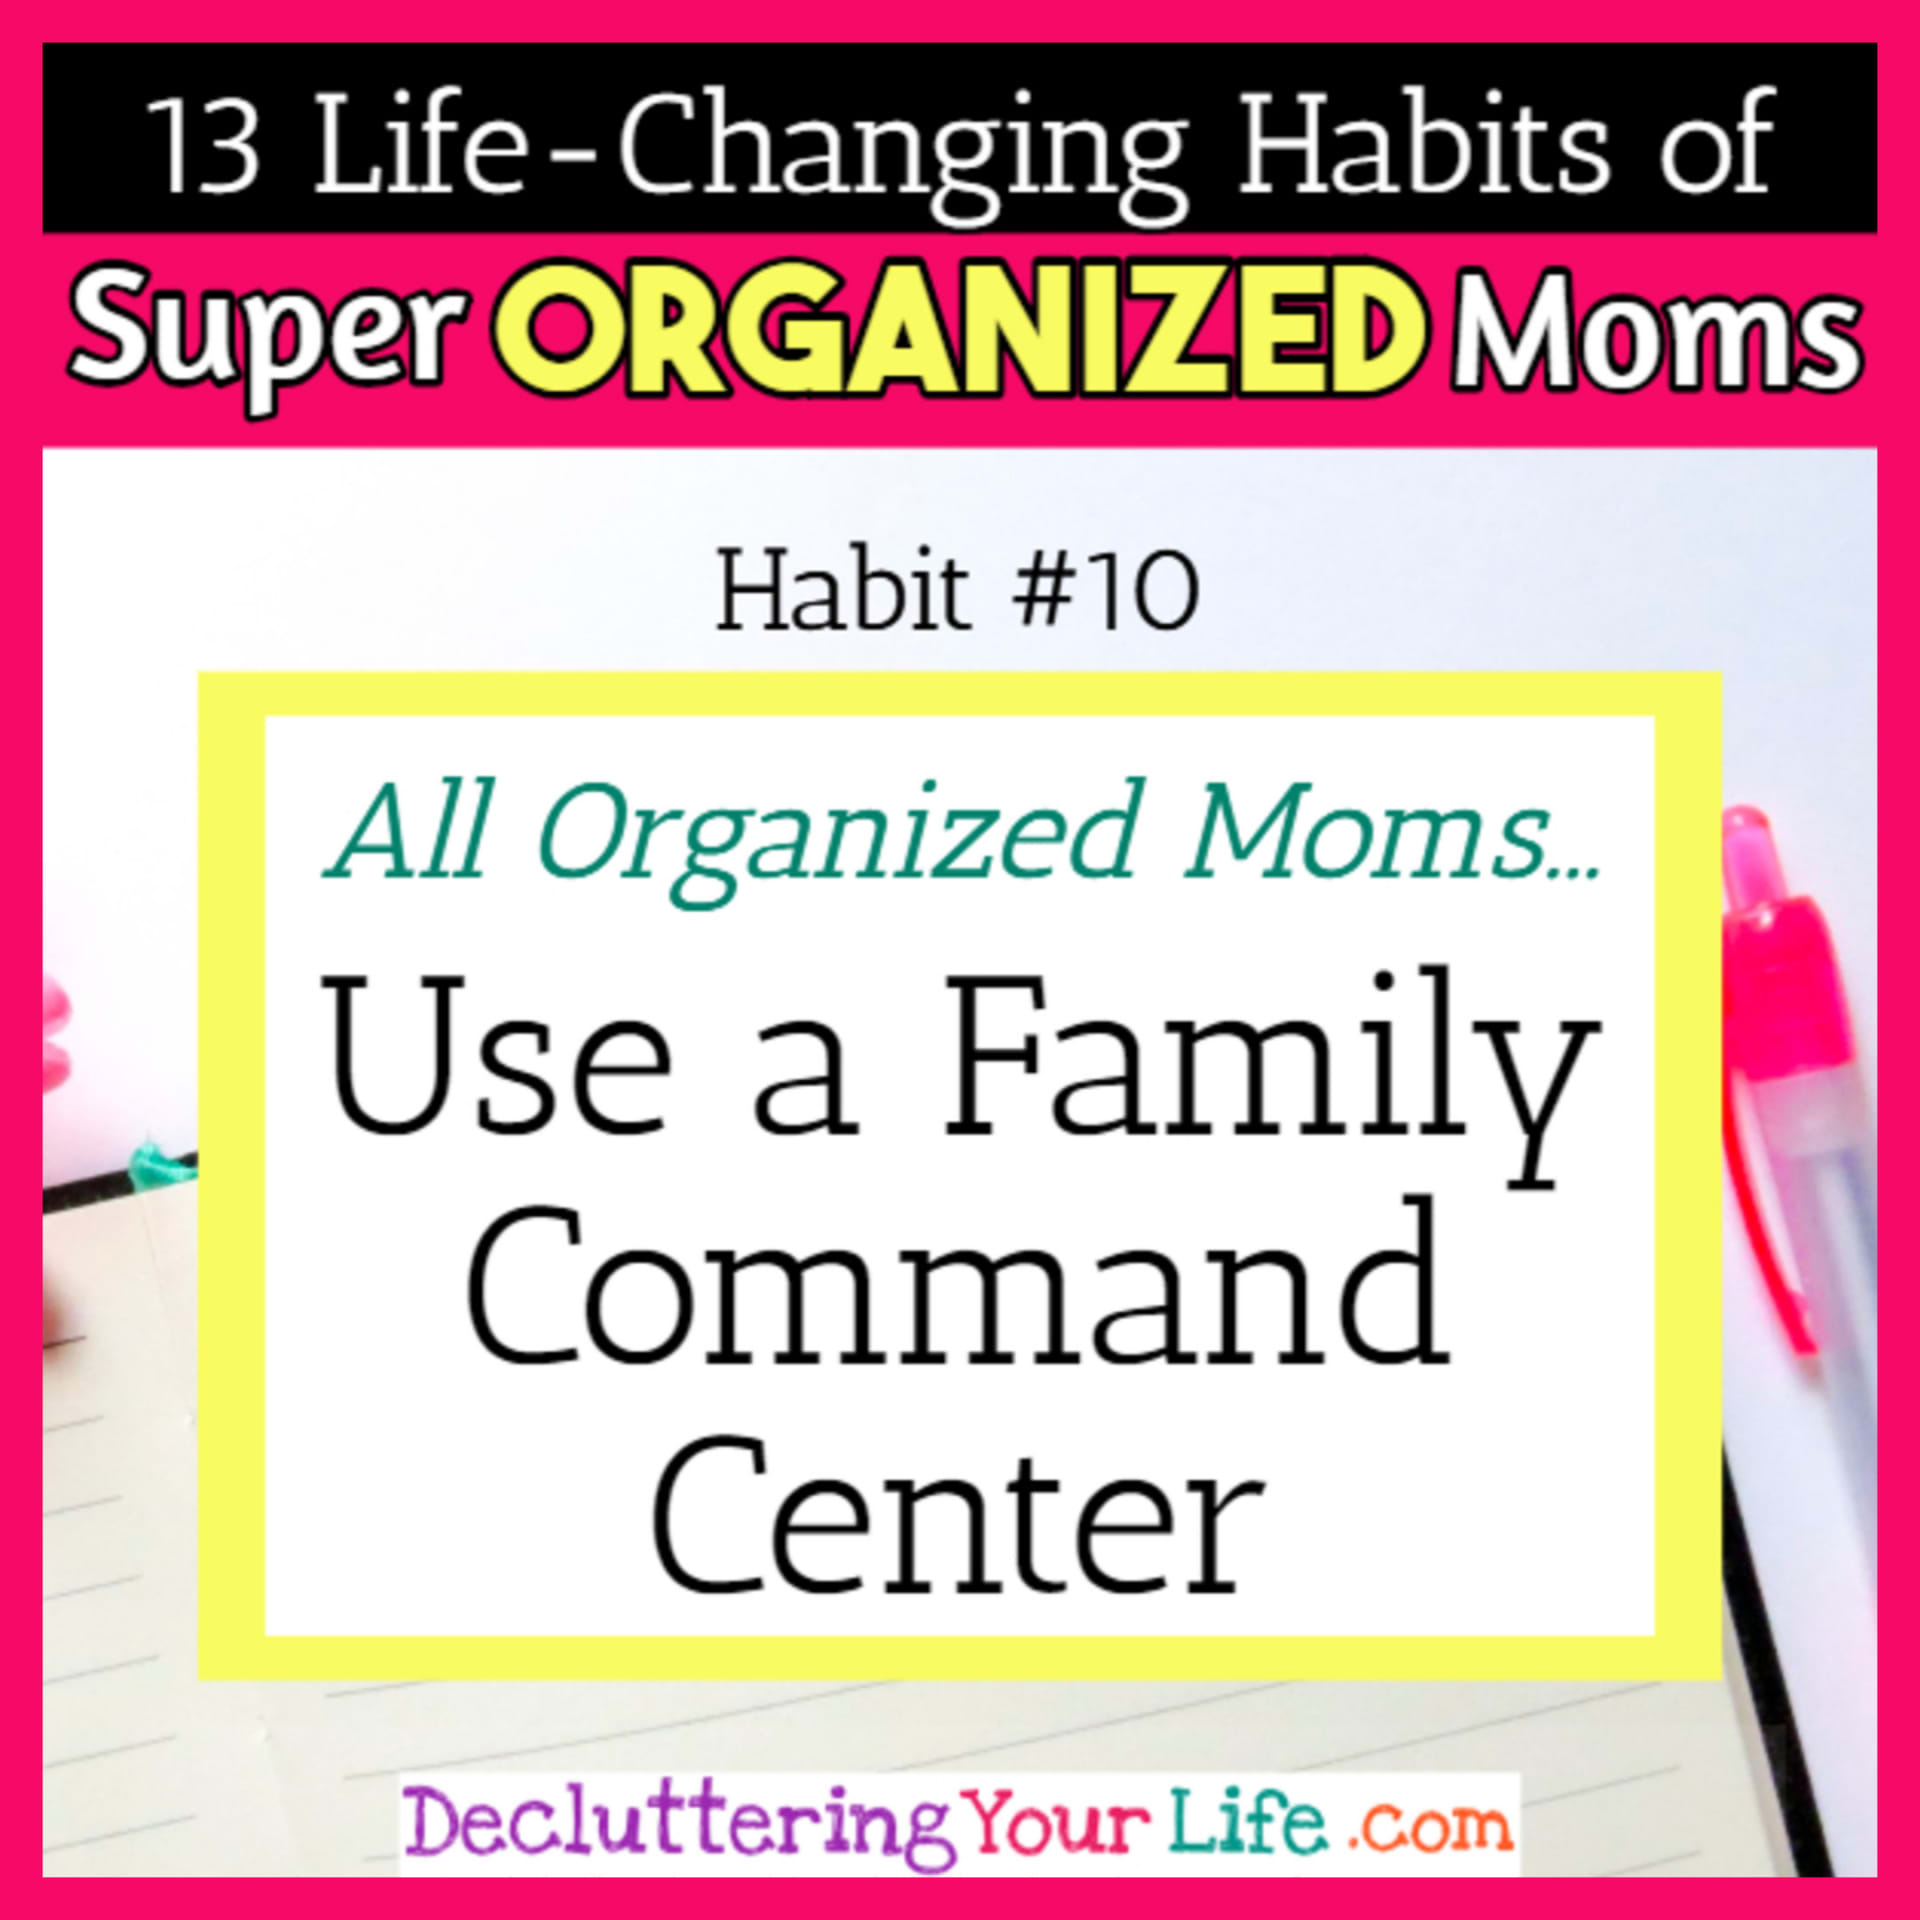 Organized moms use a family command center or family schedule wall - 13 Habits of Super Organized Mom - How To Be An Organized Mom (whether you work OR stay at home)